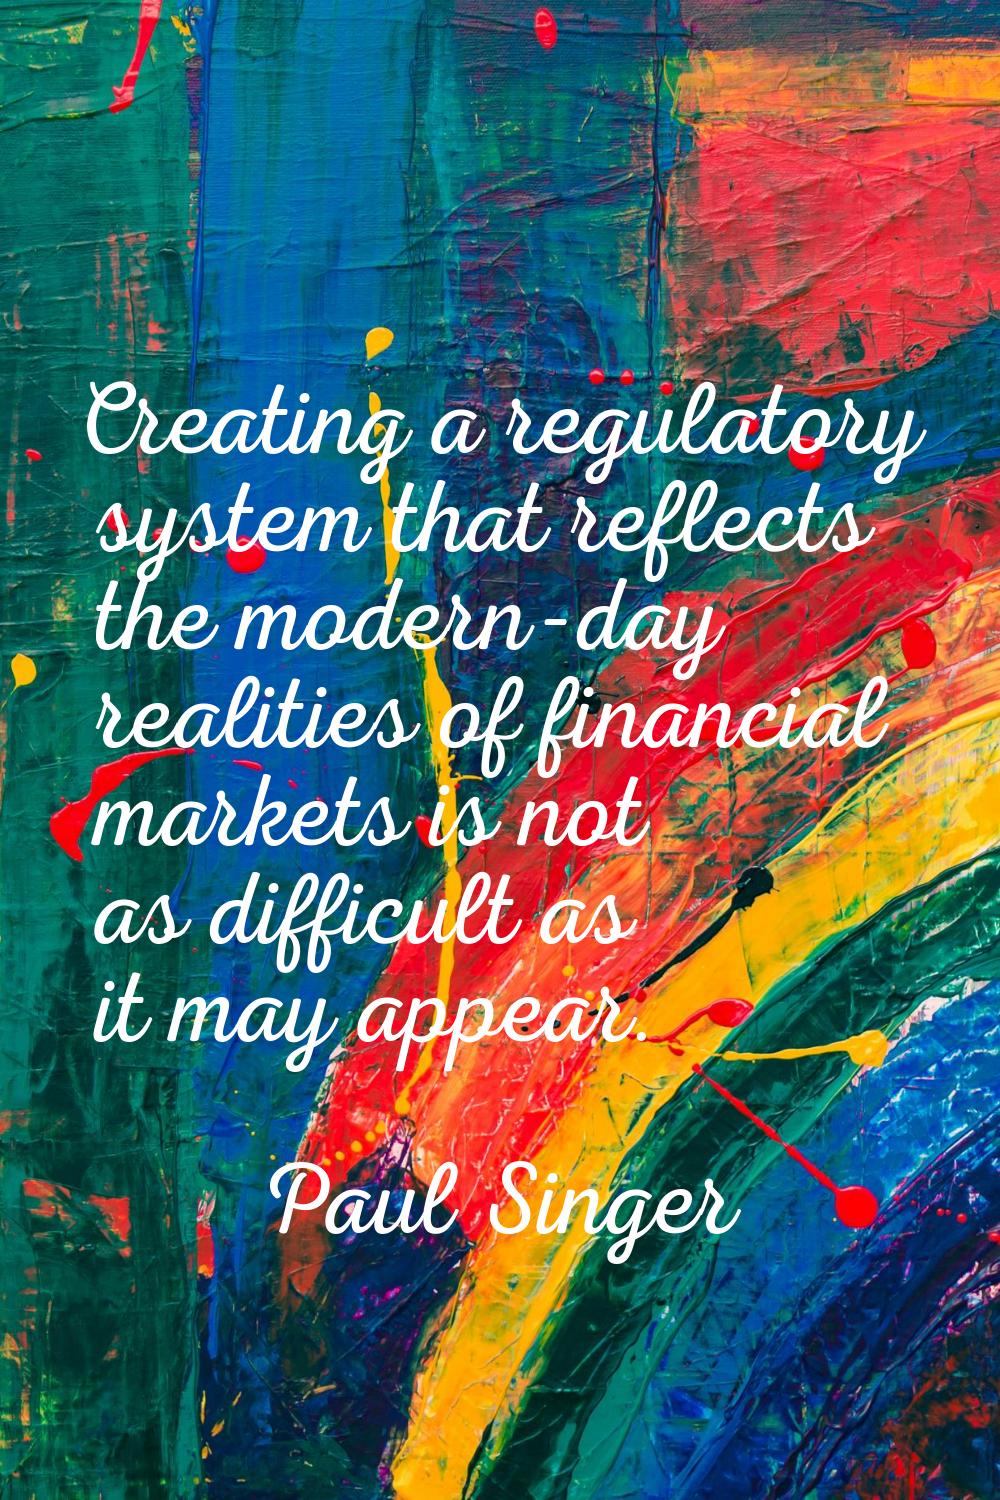 Creating a regulatory system that reflects the modern-day realities of financial markets is not as 